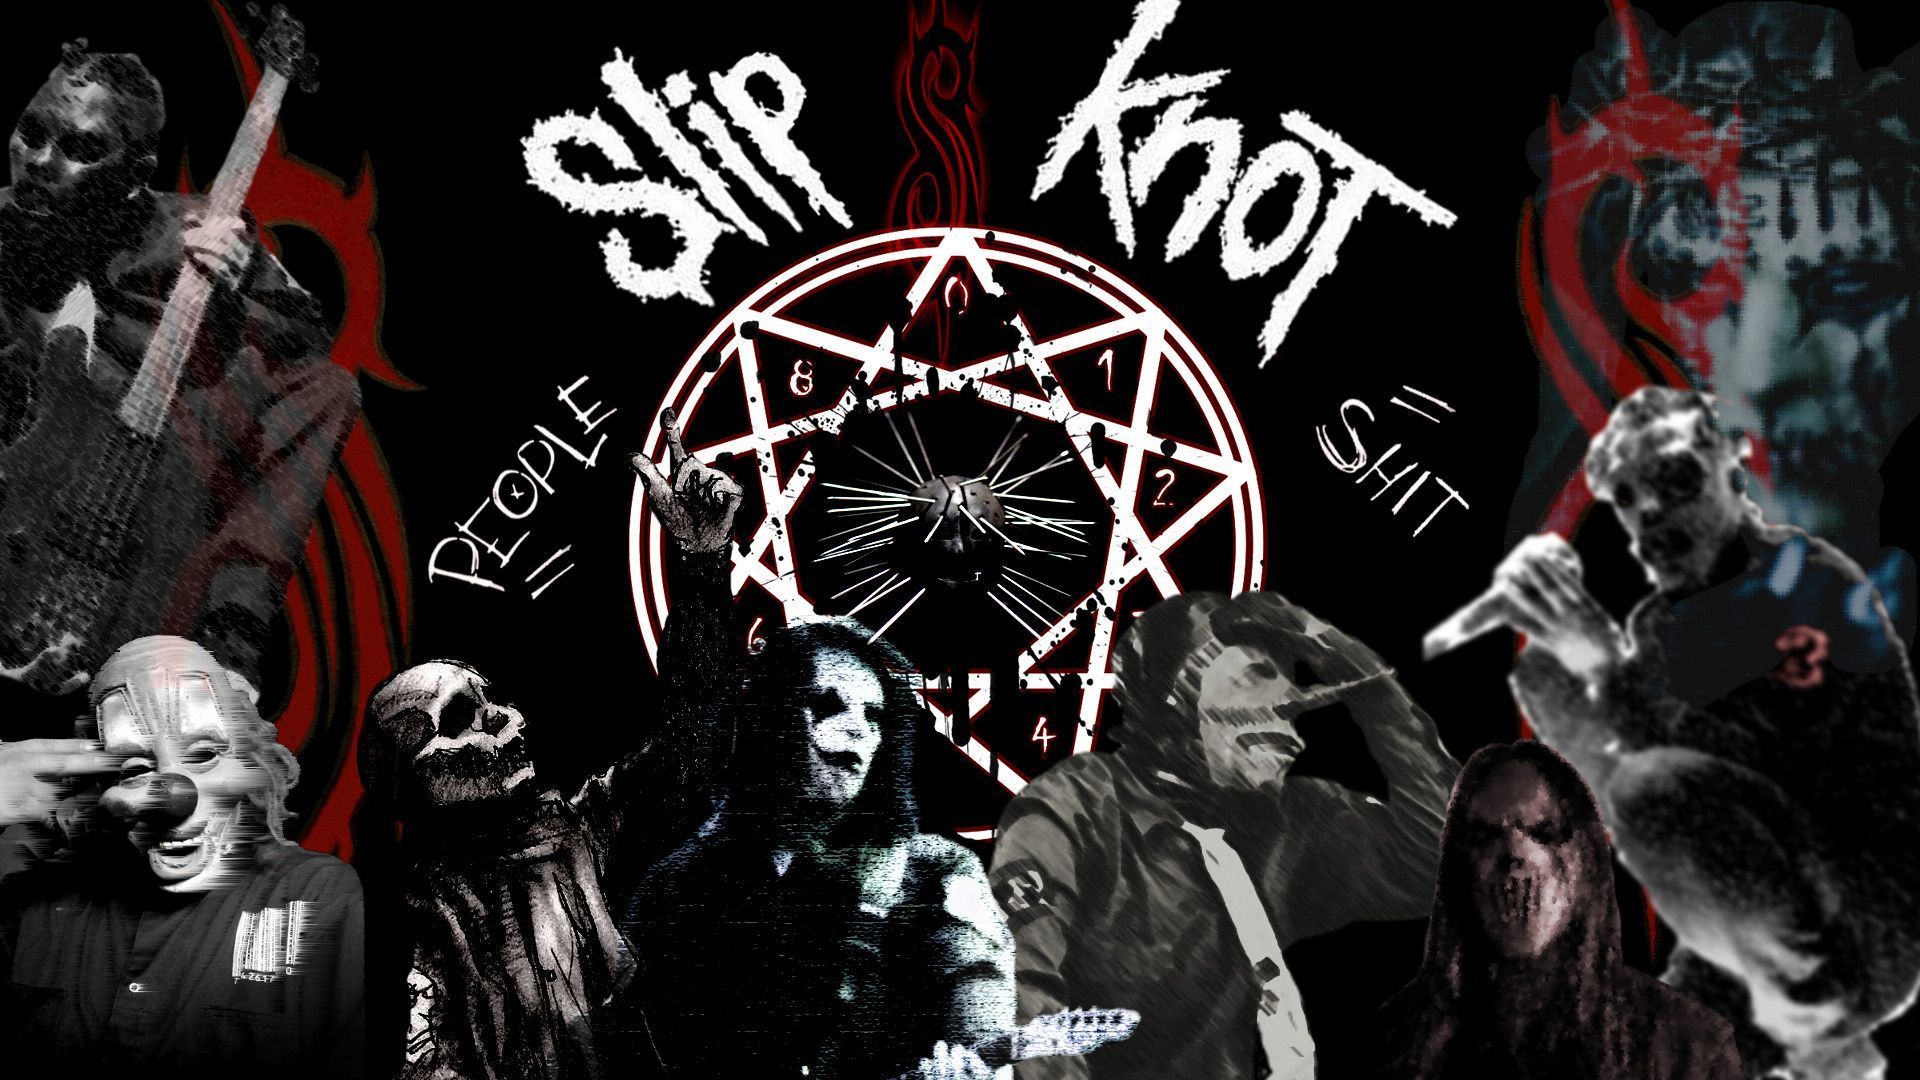 Awesome Slipknot Image Collection Wallpaper